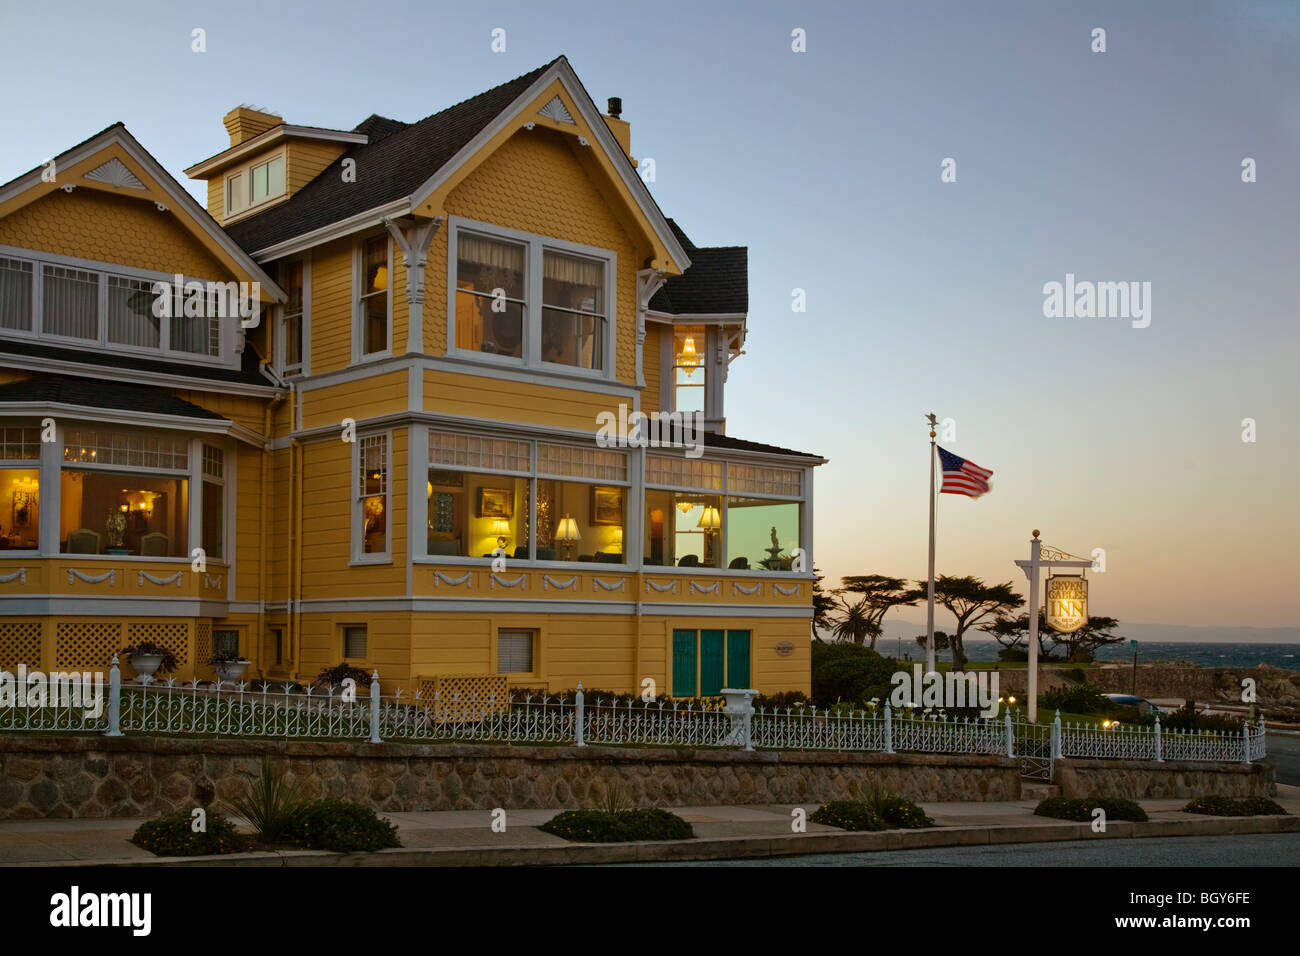 SEVEN GABLES INN was converted from a classic VICTORIAN HOME along SCENIC DRIVE - PACIFIC GROVE, CALIFORNIA Stock Photo